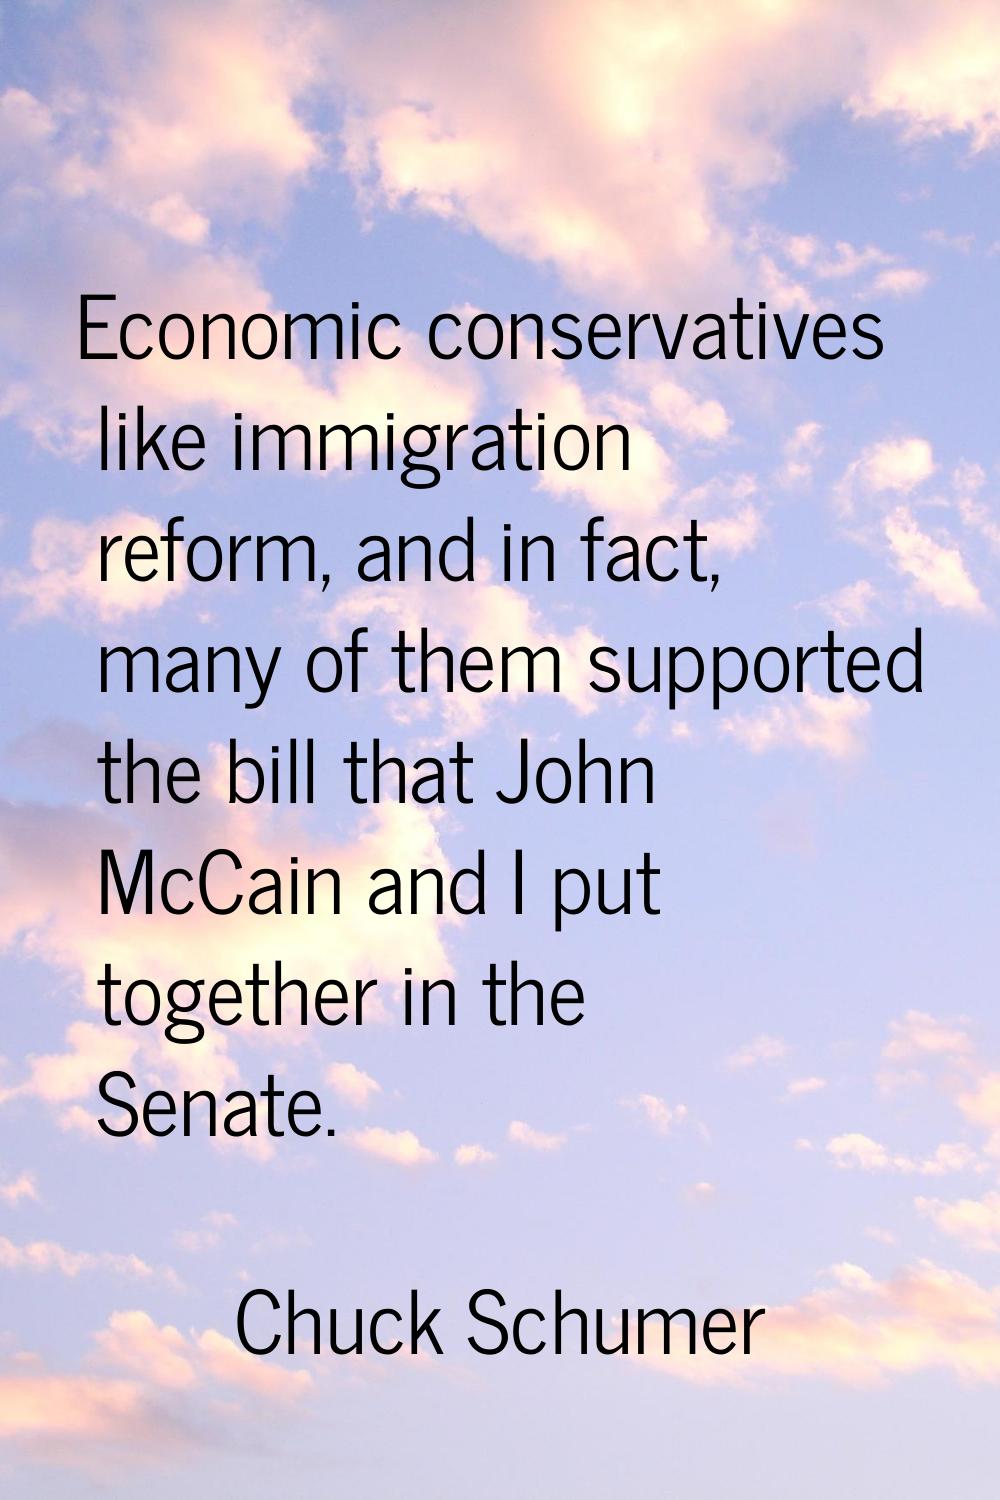 Economic conservatives like immigration reform, and in fact, many of them supported the bill that J